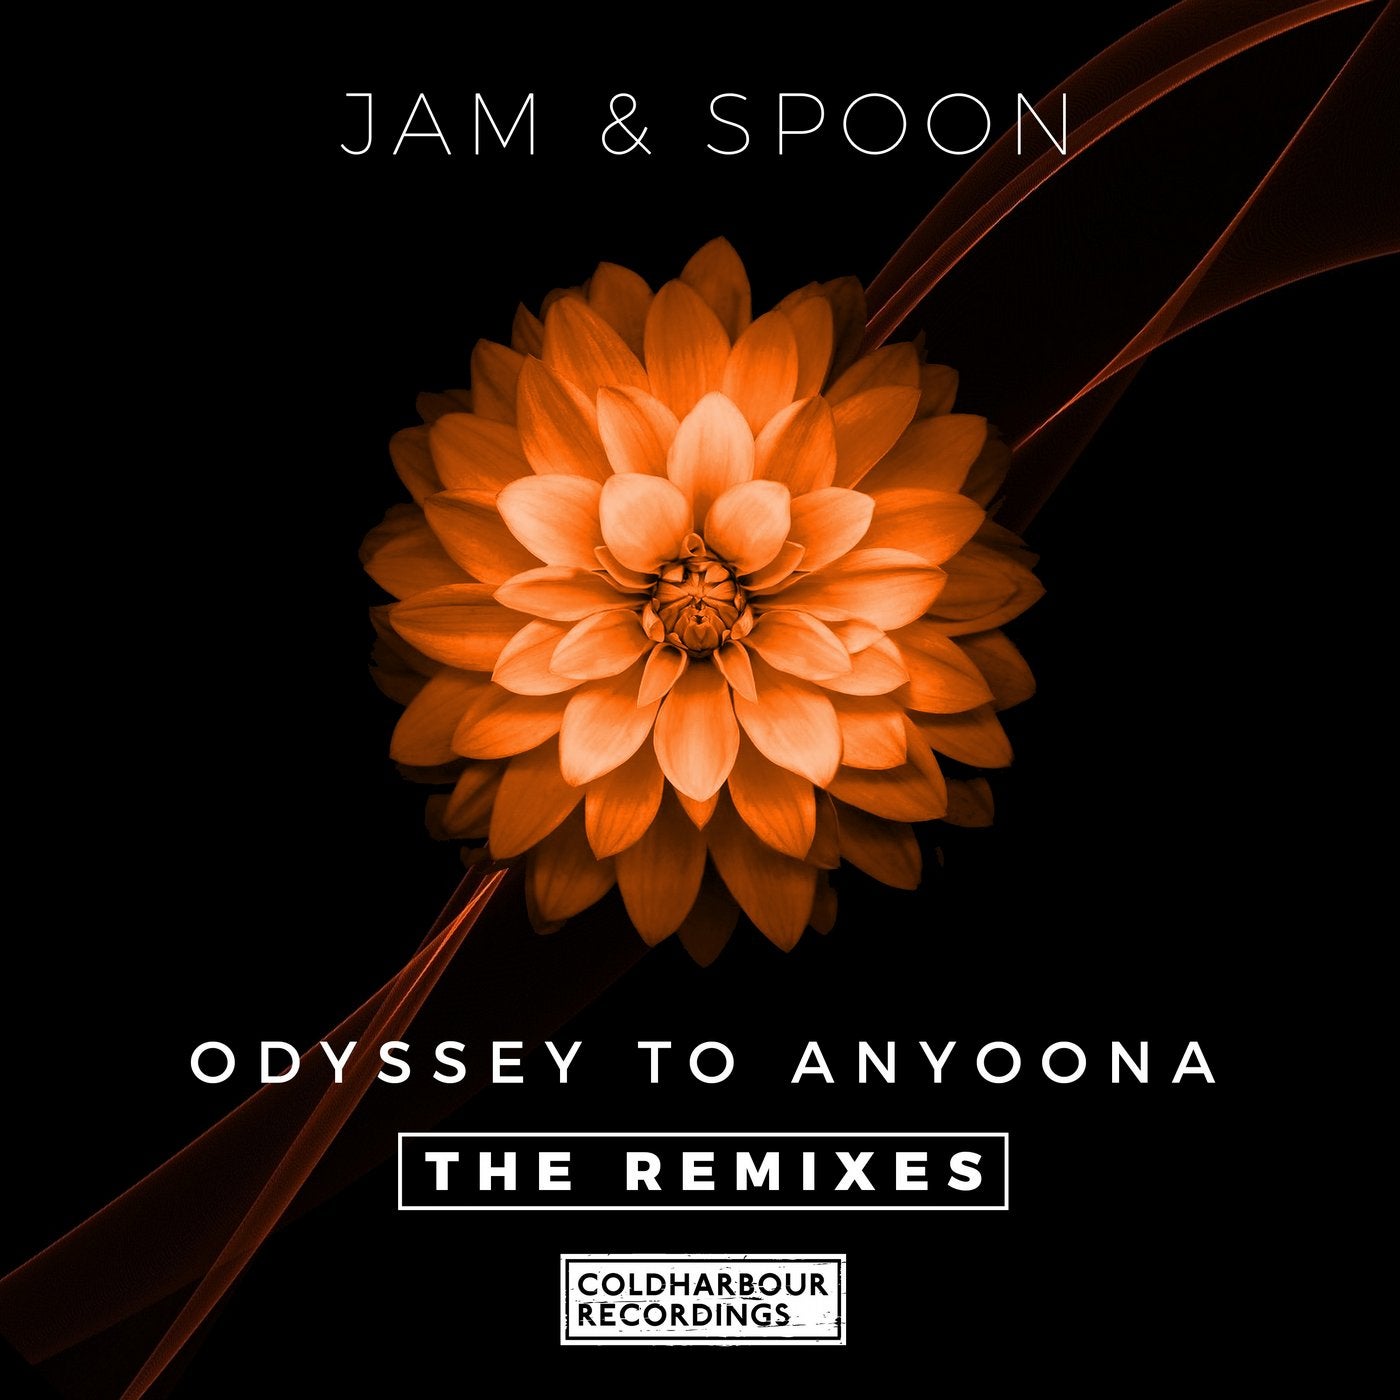 Odyssey to Anyoona